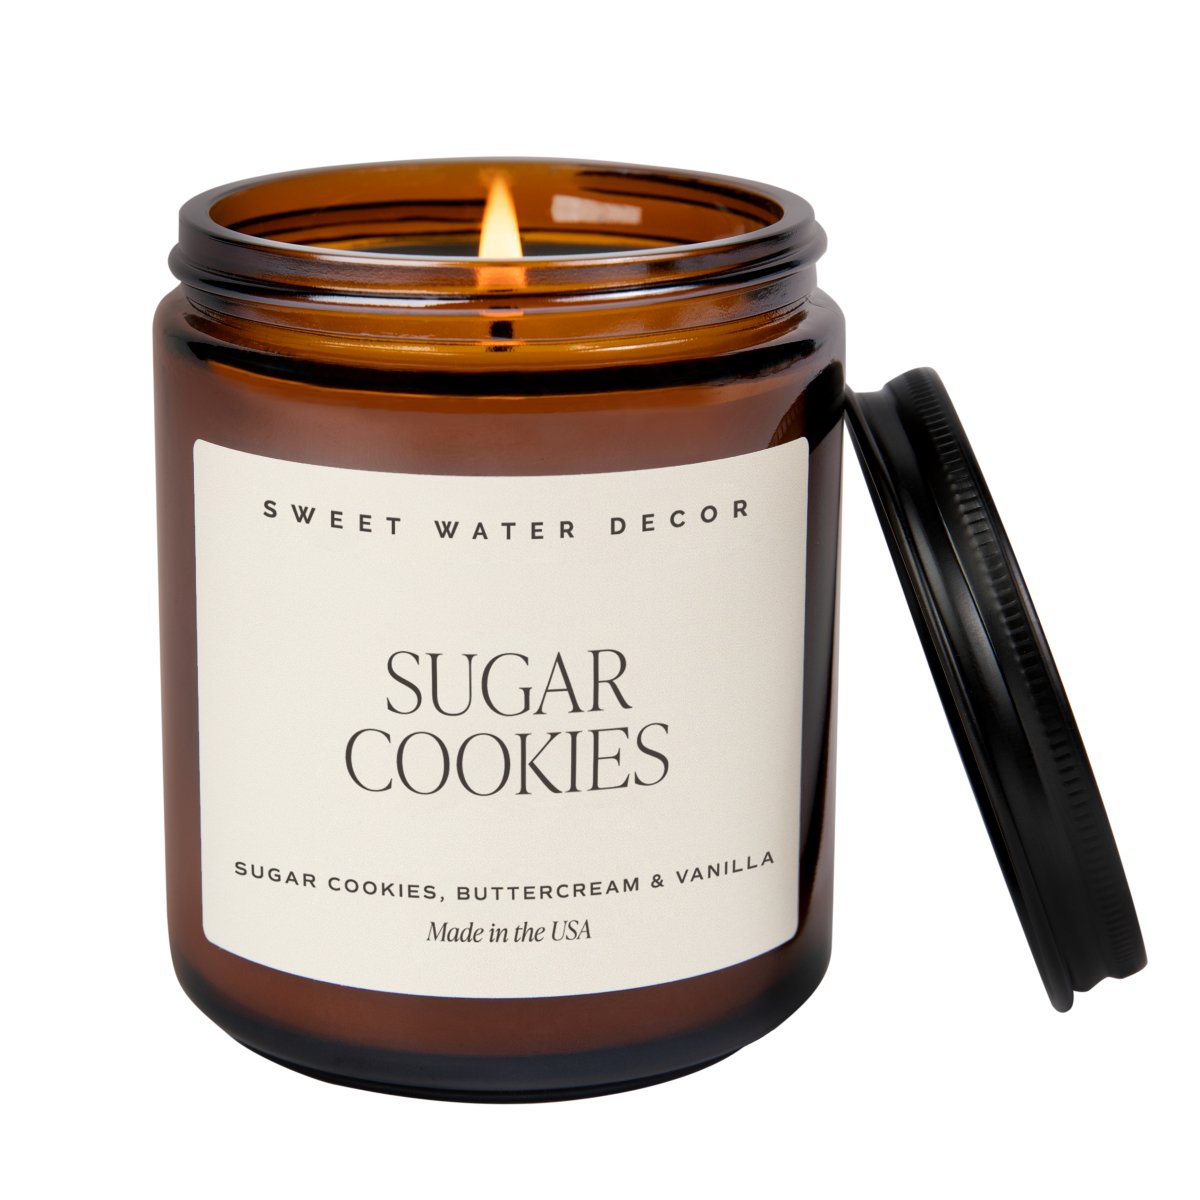 Sweet Water Decor Sugar Cookies Soy Candle - Amber Jar - 9 oz - lily & onyx